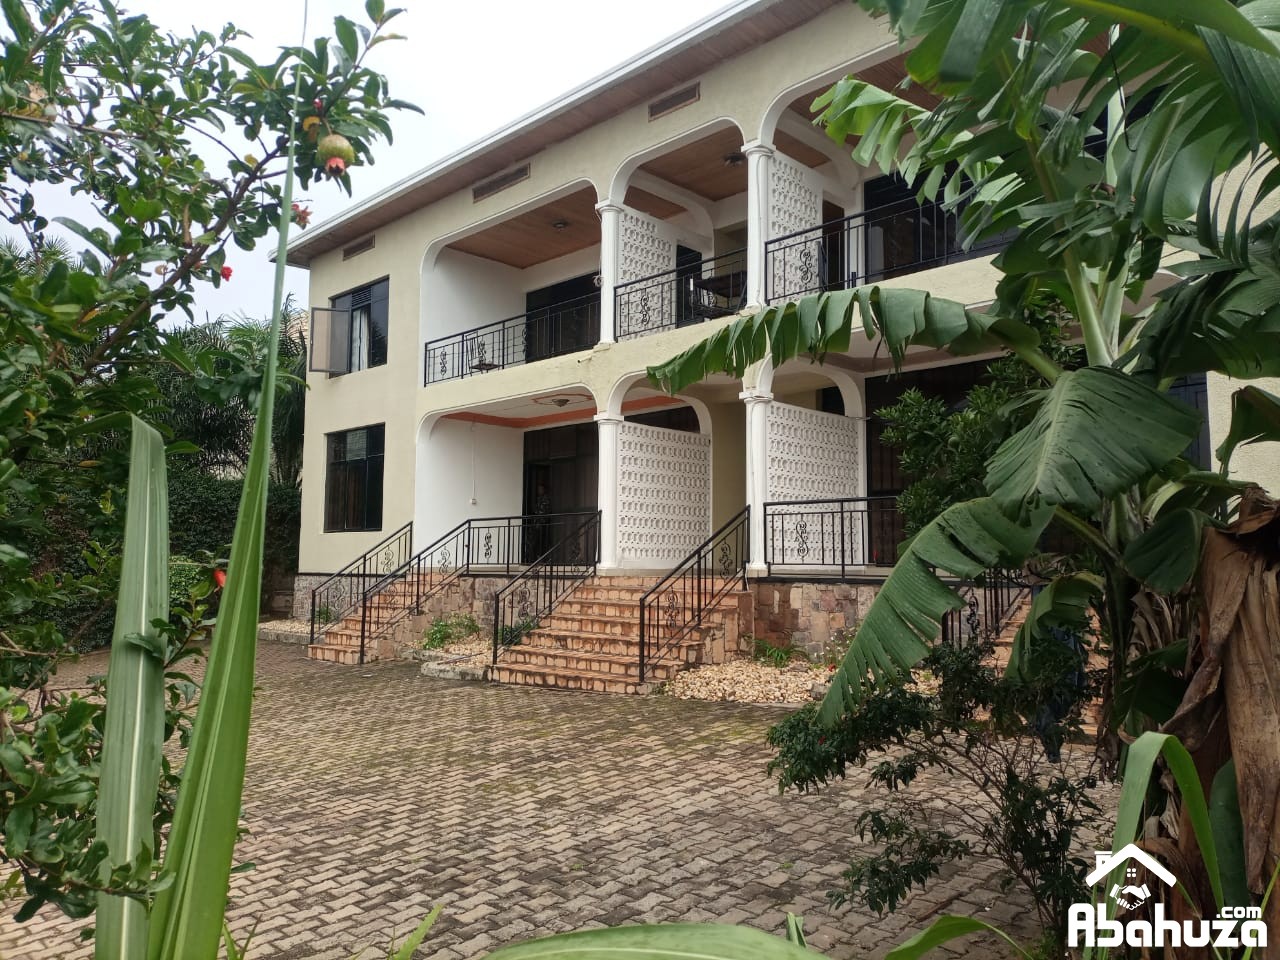 A FURNISHED 3 BEDROOM APARTMENT FOR RENT IN KIGALI AT KACYIRU